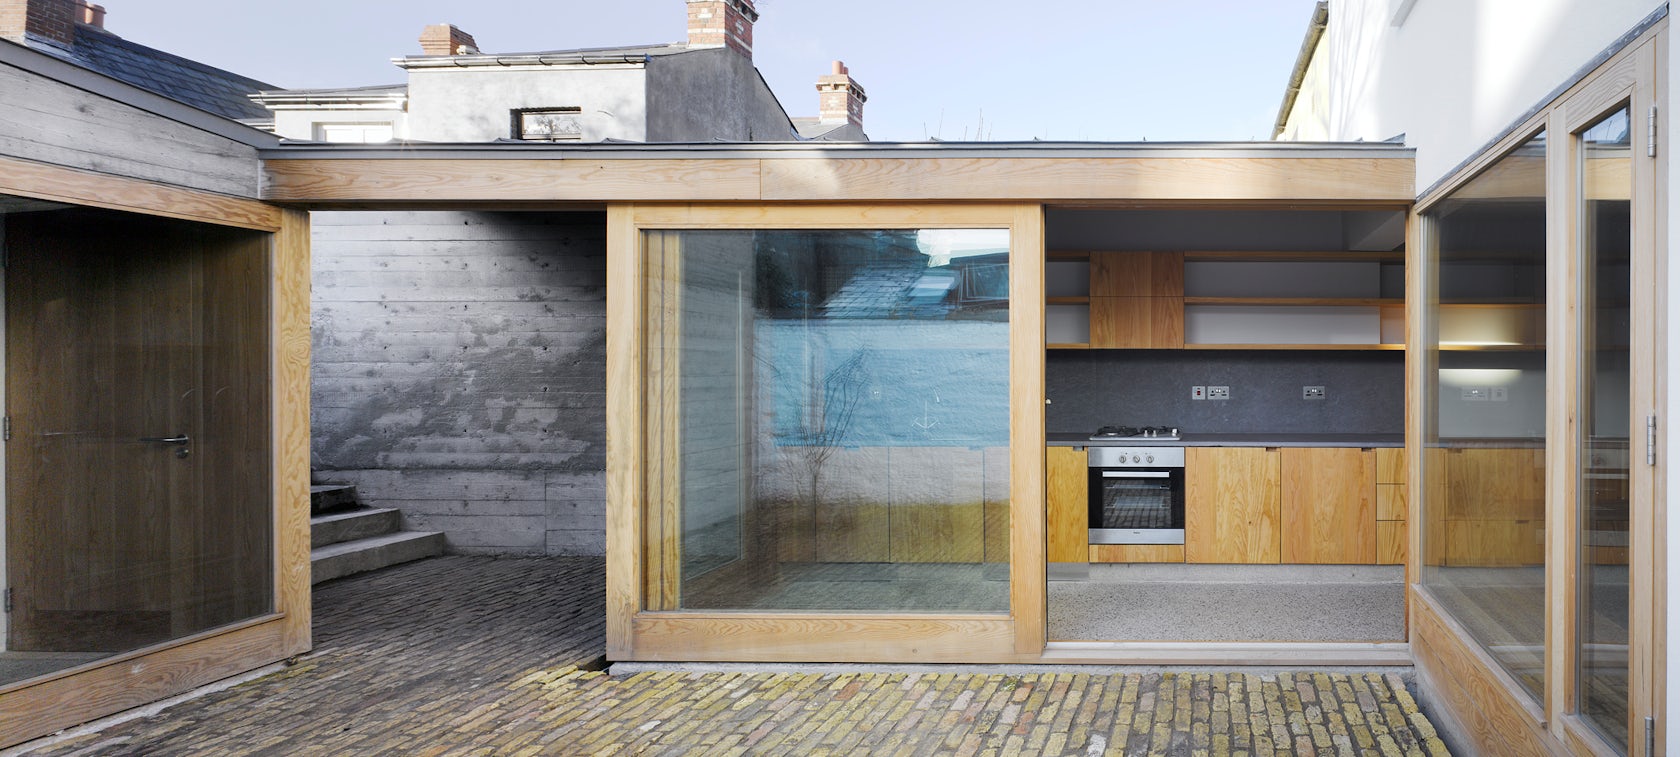 © Donaghy & Dimond Architects